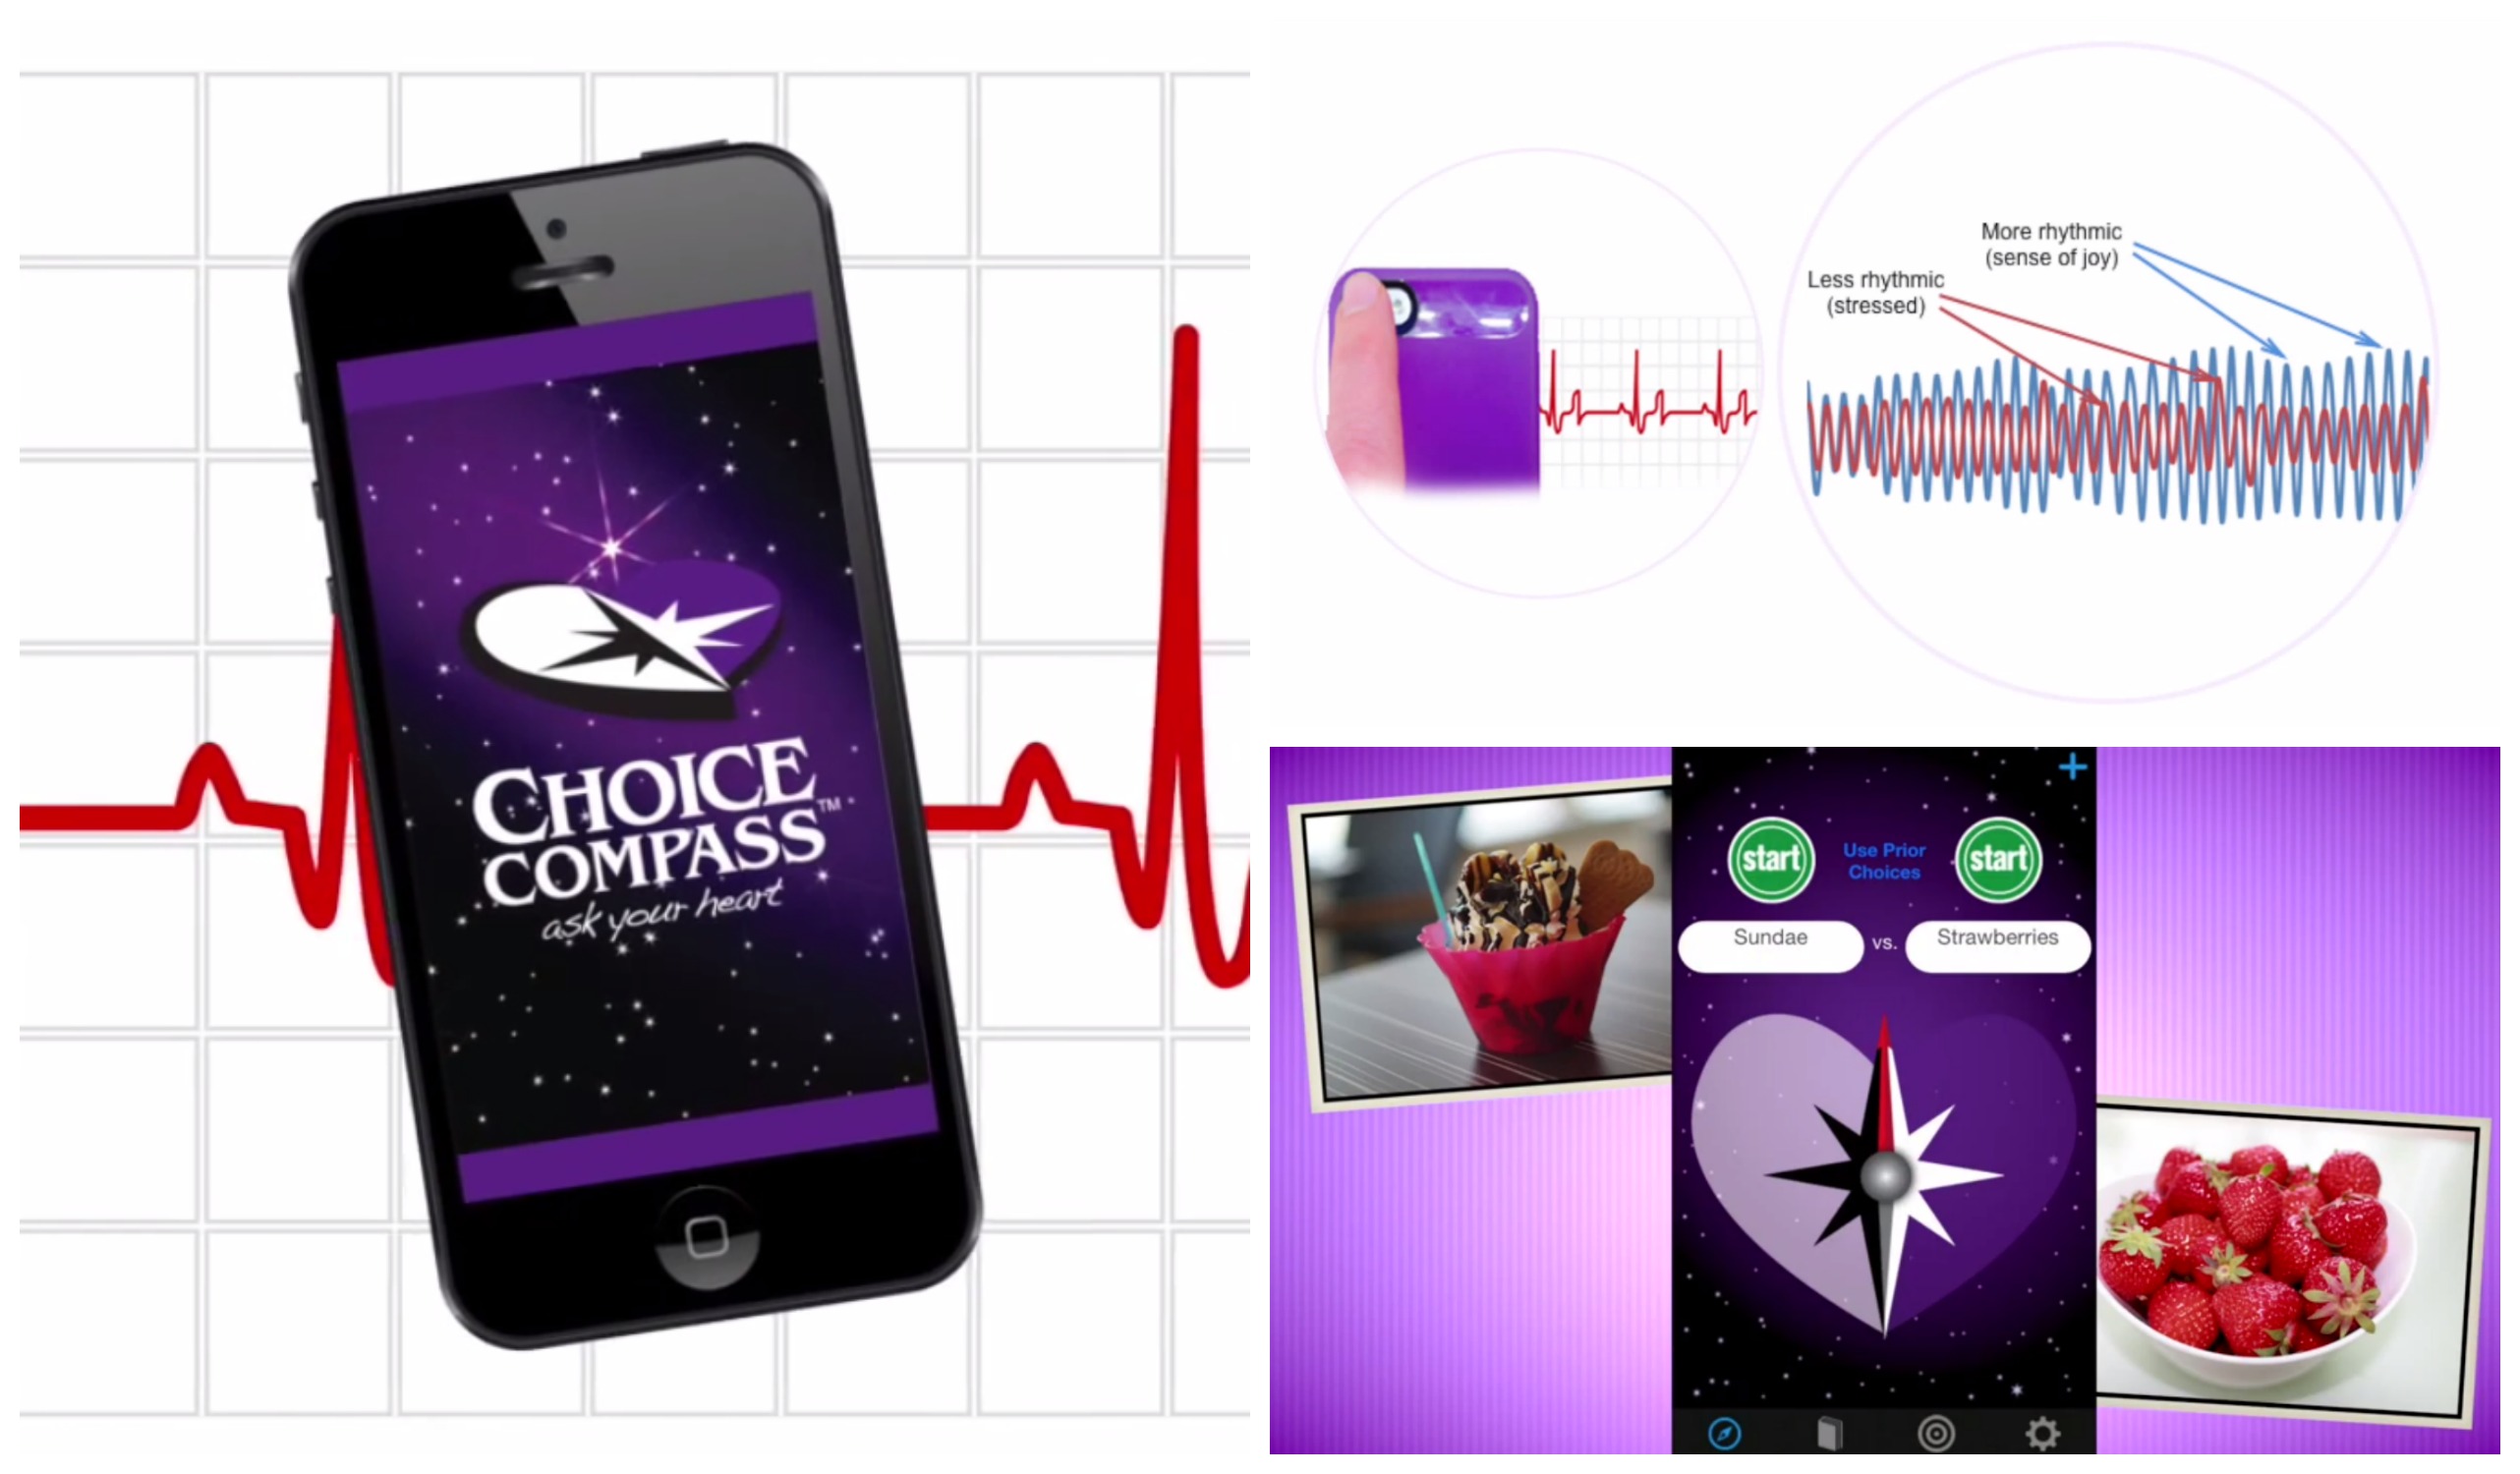 Choice Compass gets to the heart of the matter by allowing users to access their heart rhythms when deciding between two choices.